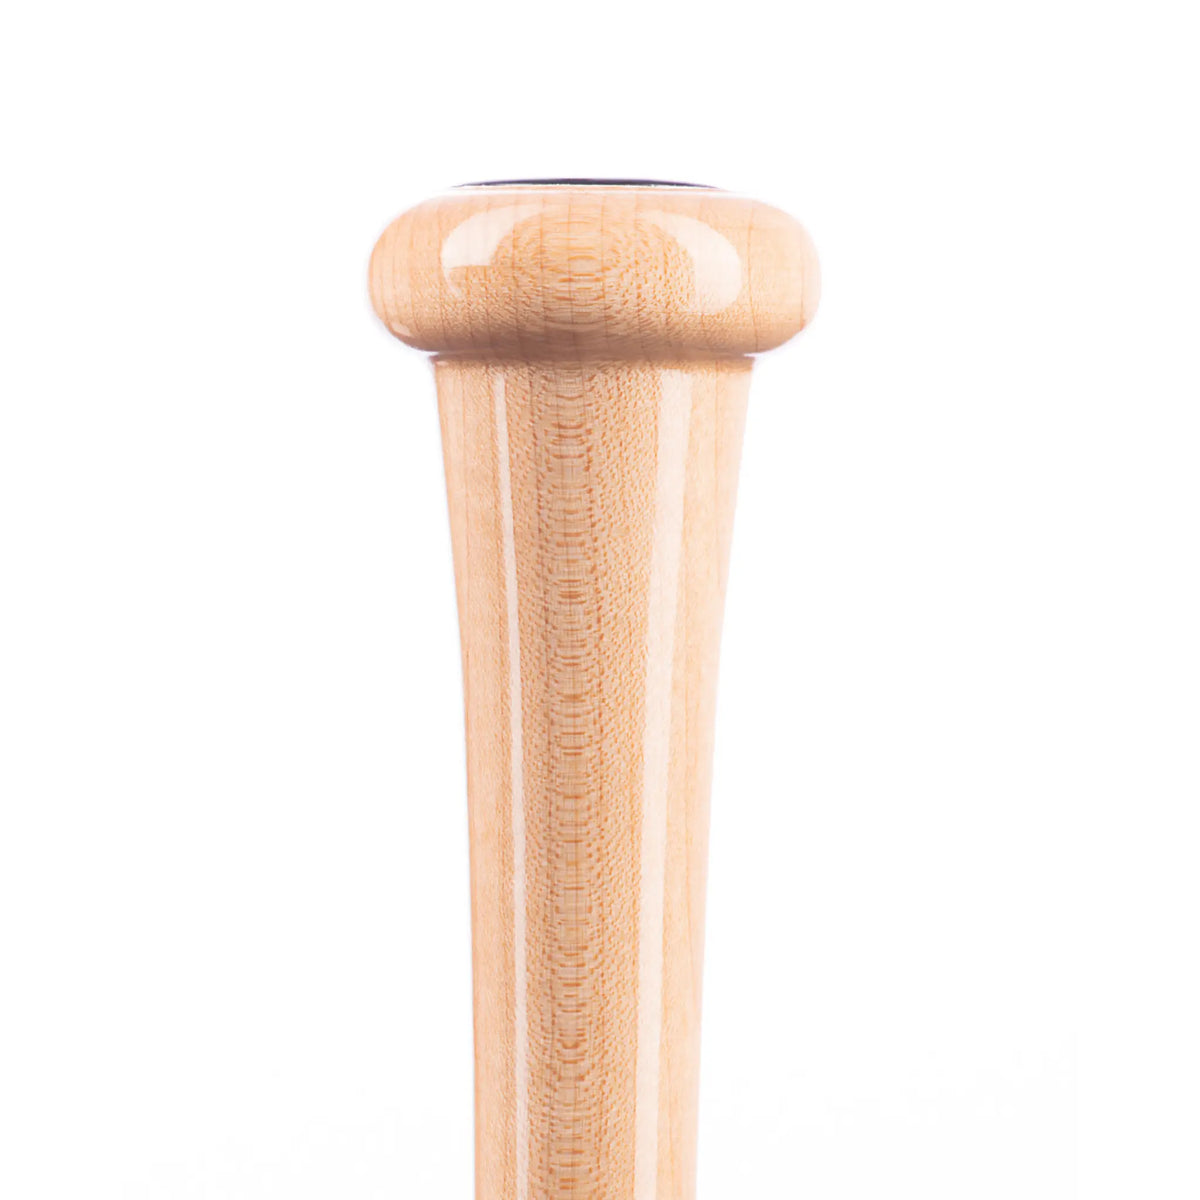 Detailed view of the best traditional knob on a maple wooden baseball bat, perfect for college level players.